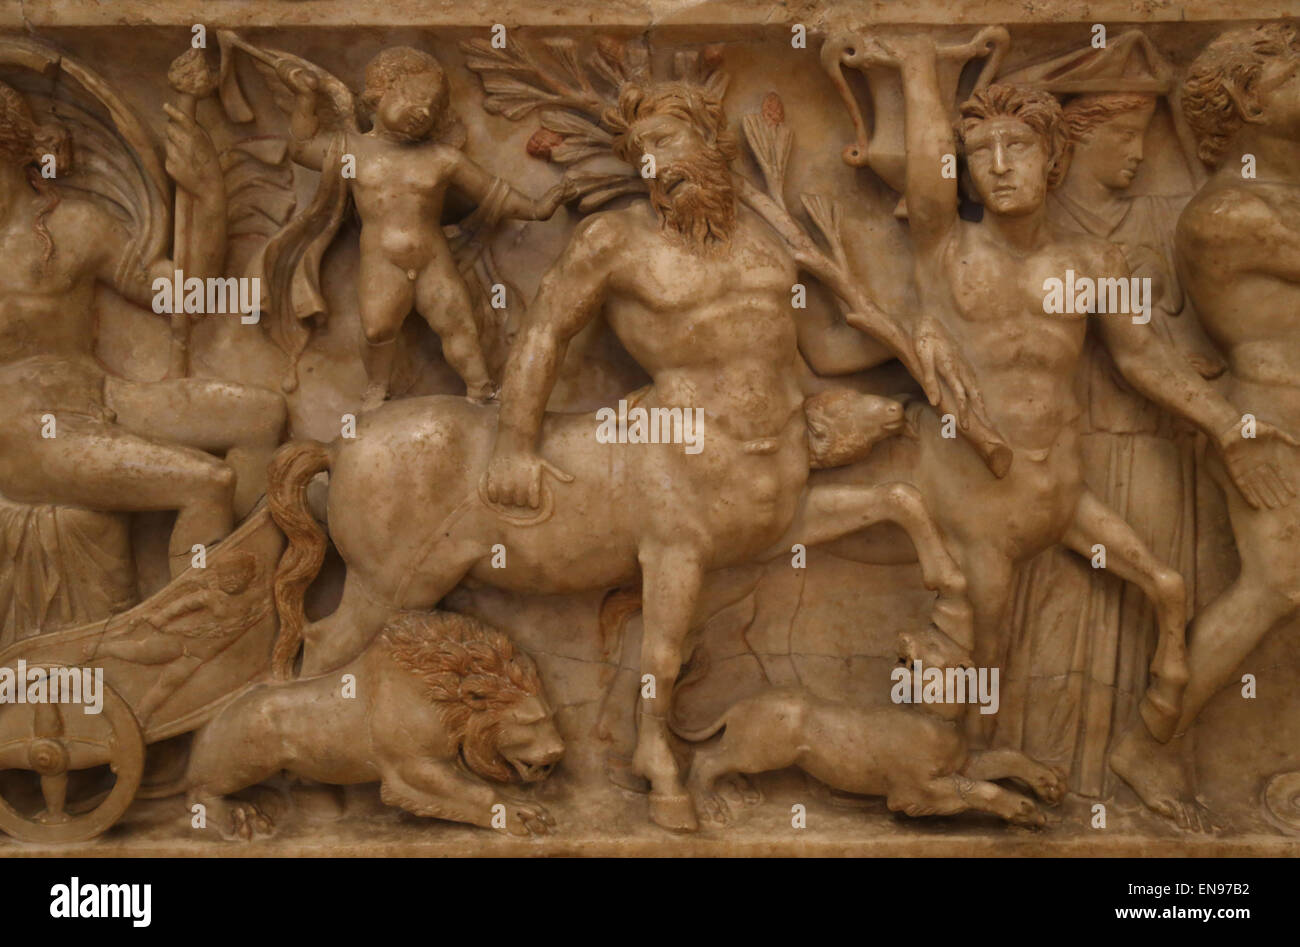 Roman art. Sarcophagus with Dionysian procession. Dionysus on the chariot,  Cupido, lion, centaurs and panther. Detail. Stock Photo